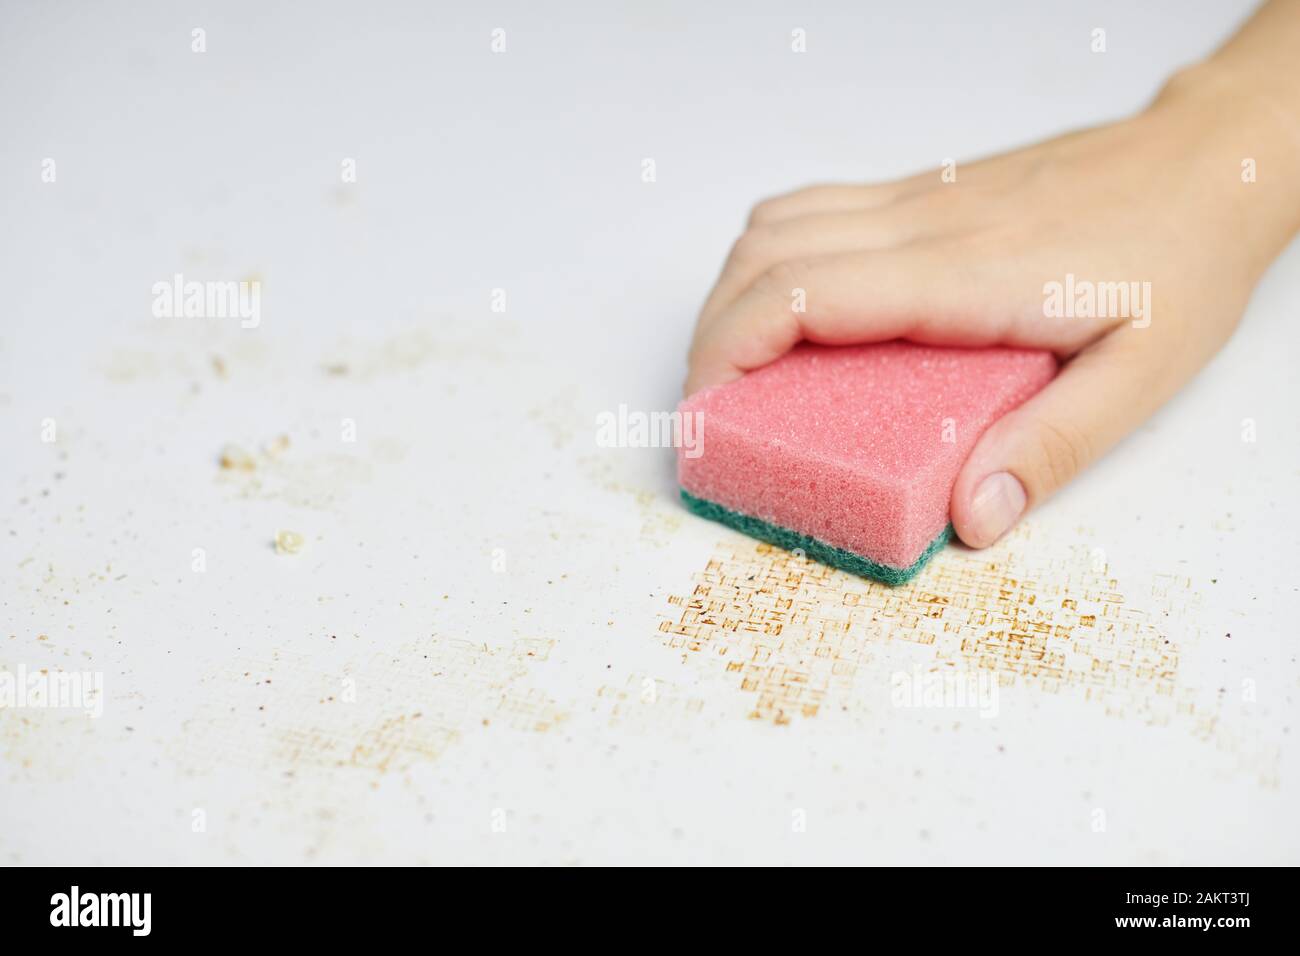 Sponge in woman hand removes dirt, bread crumbs and leftovers. Cleaning kitchen table. Household chores Stock Photo